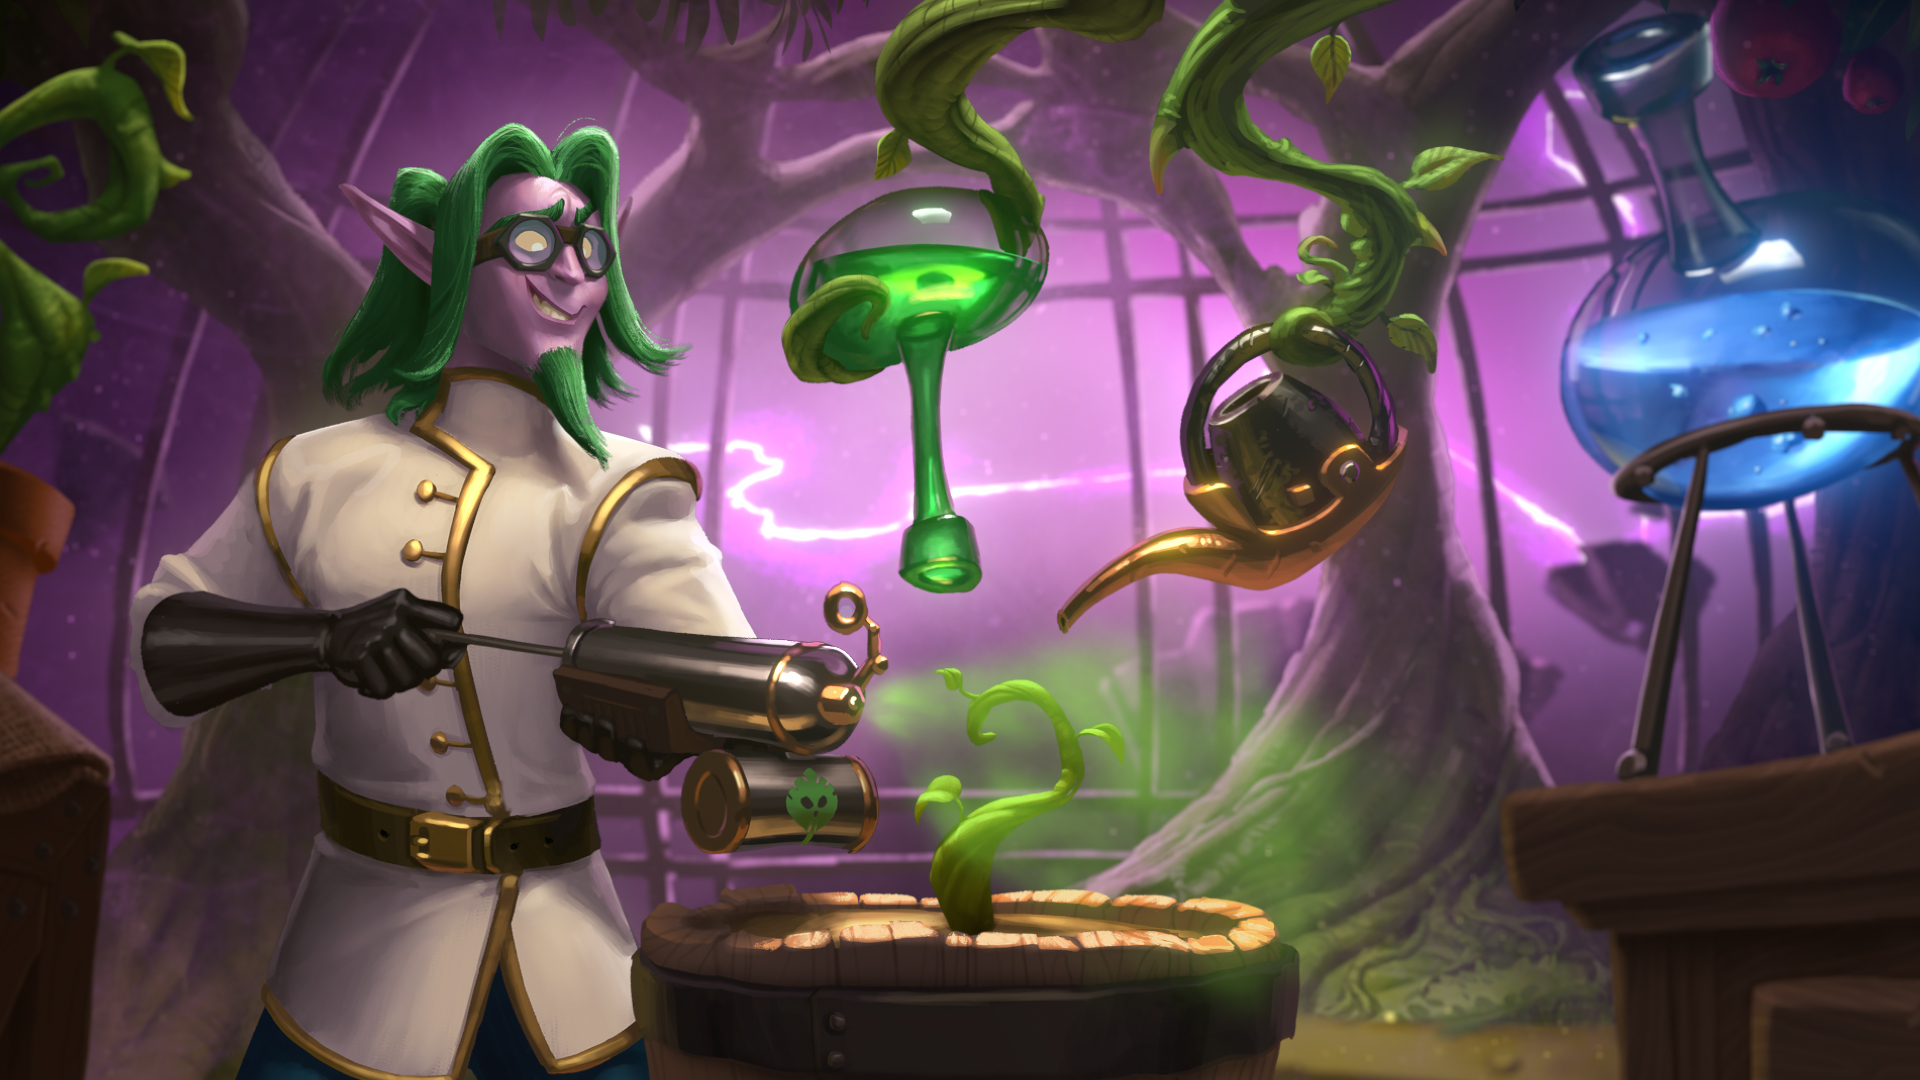 General 1920x1080 The Booms day Project Hearthstone: Heroes of Warcraft Blizzard Entertainment video games Hearthstone video game characters trees video game men video game art gloves smiling pointy ears leaves potions scientists goggles